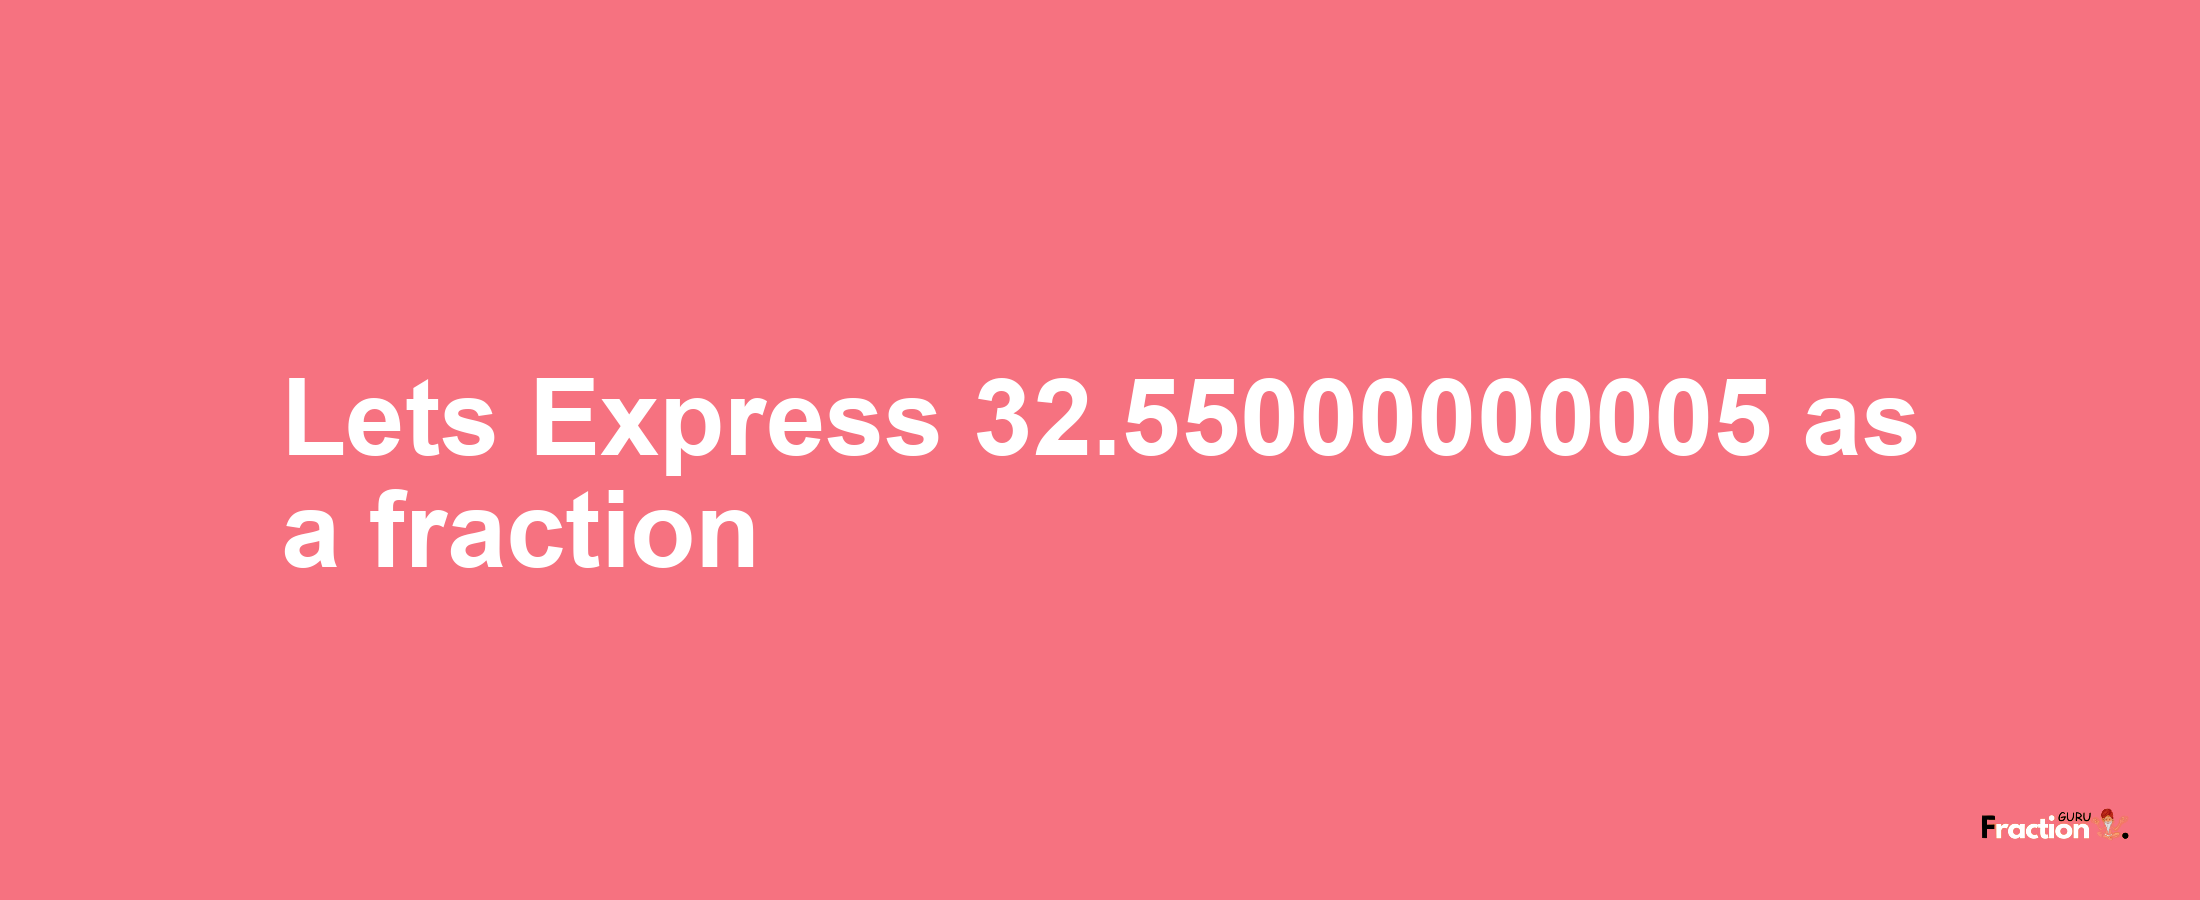 Lets Express 32.55000000005 as afraction